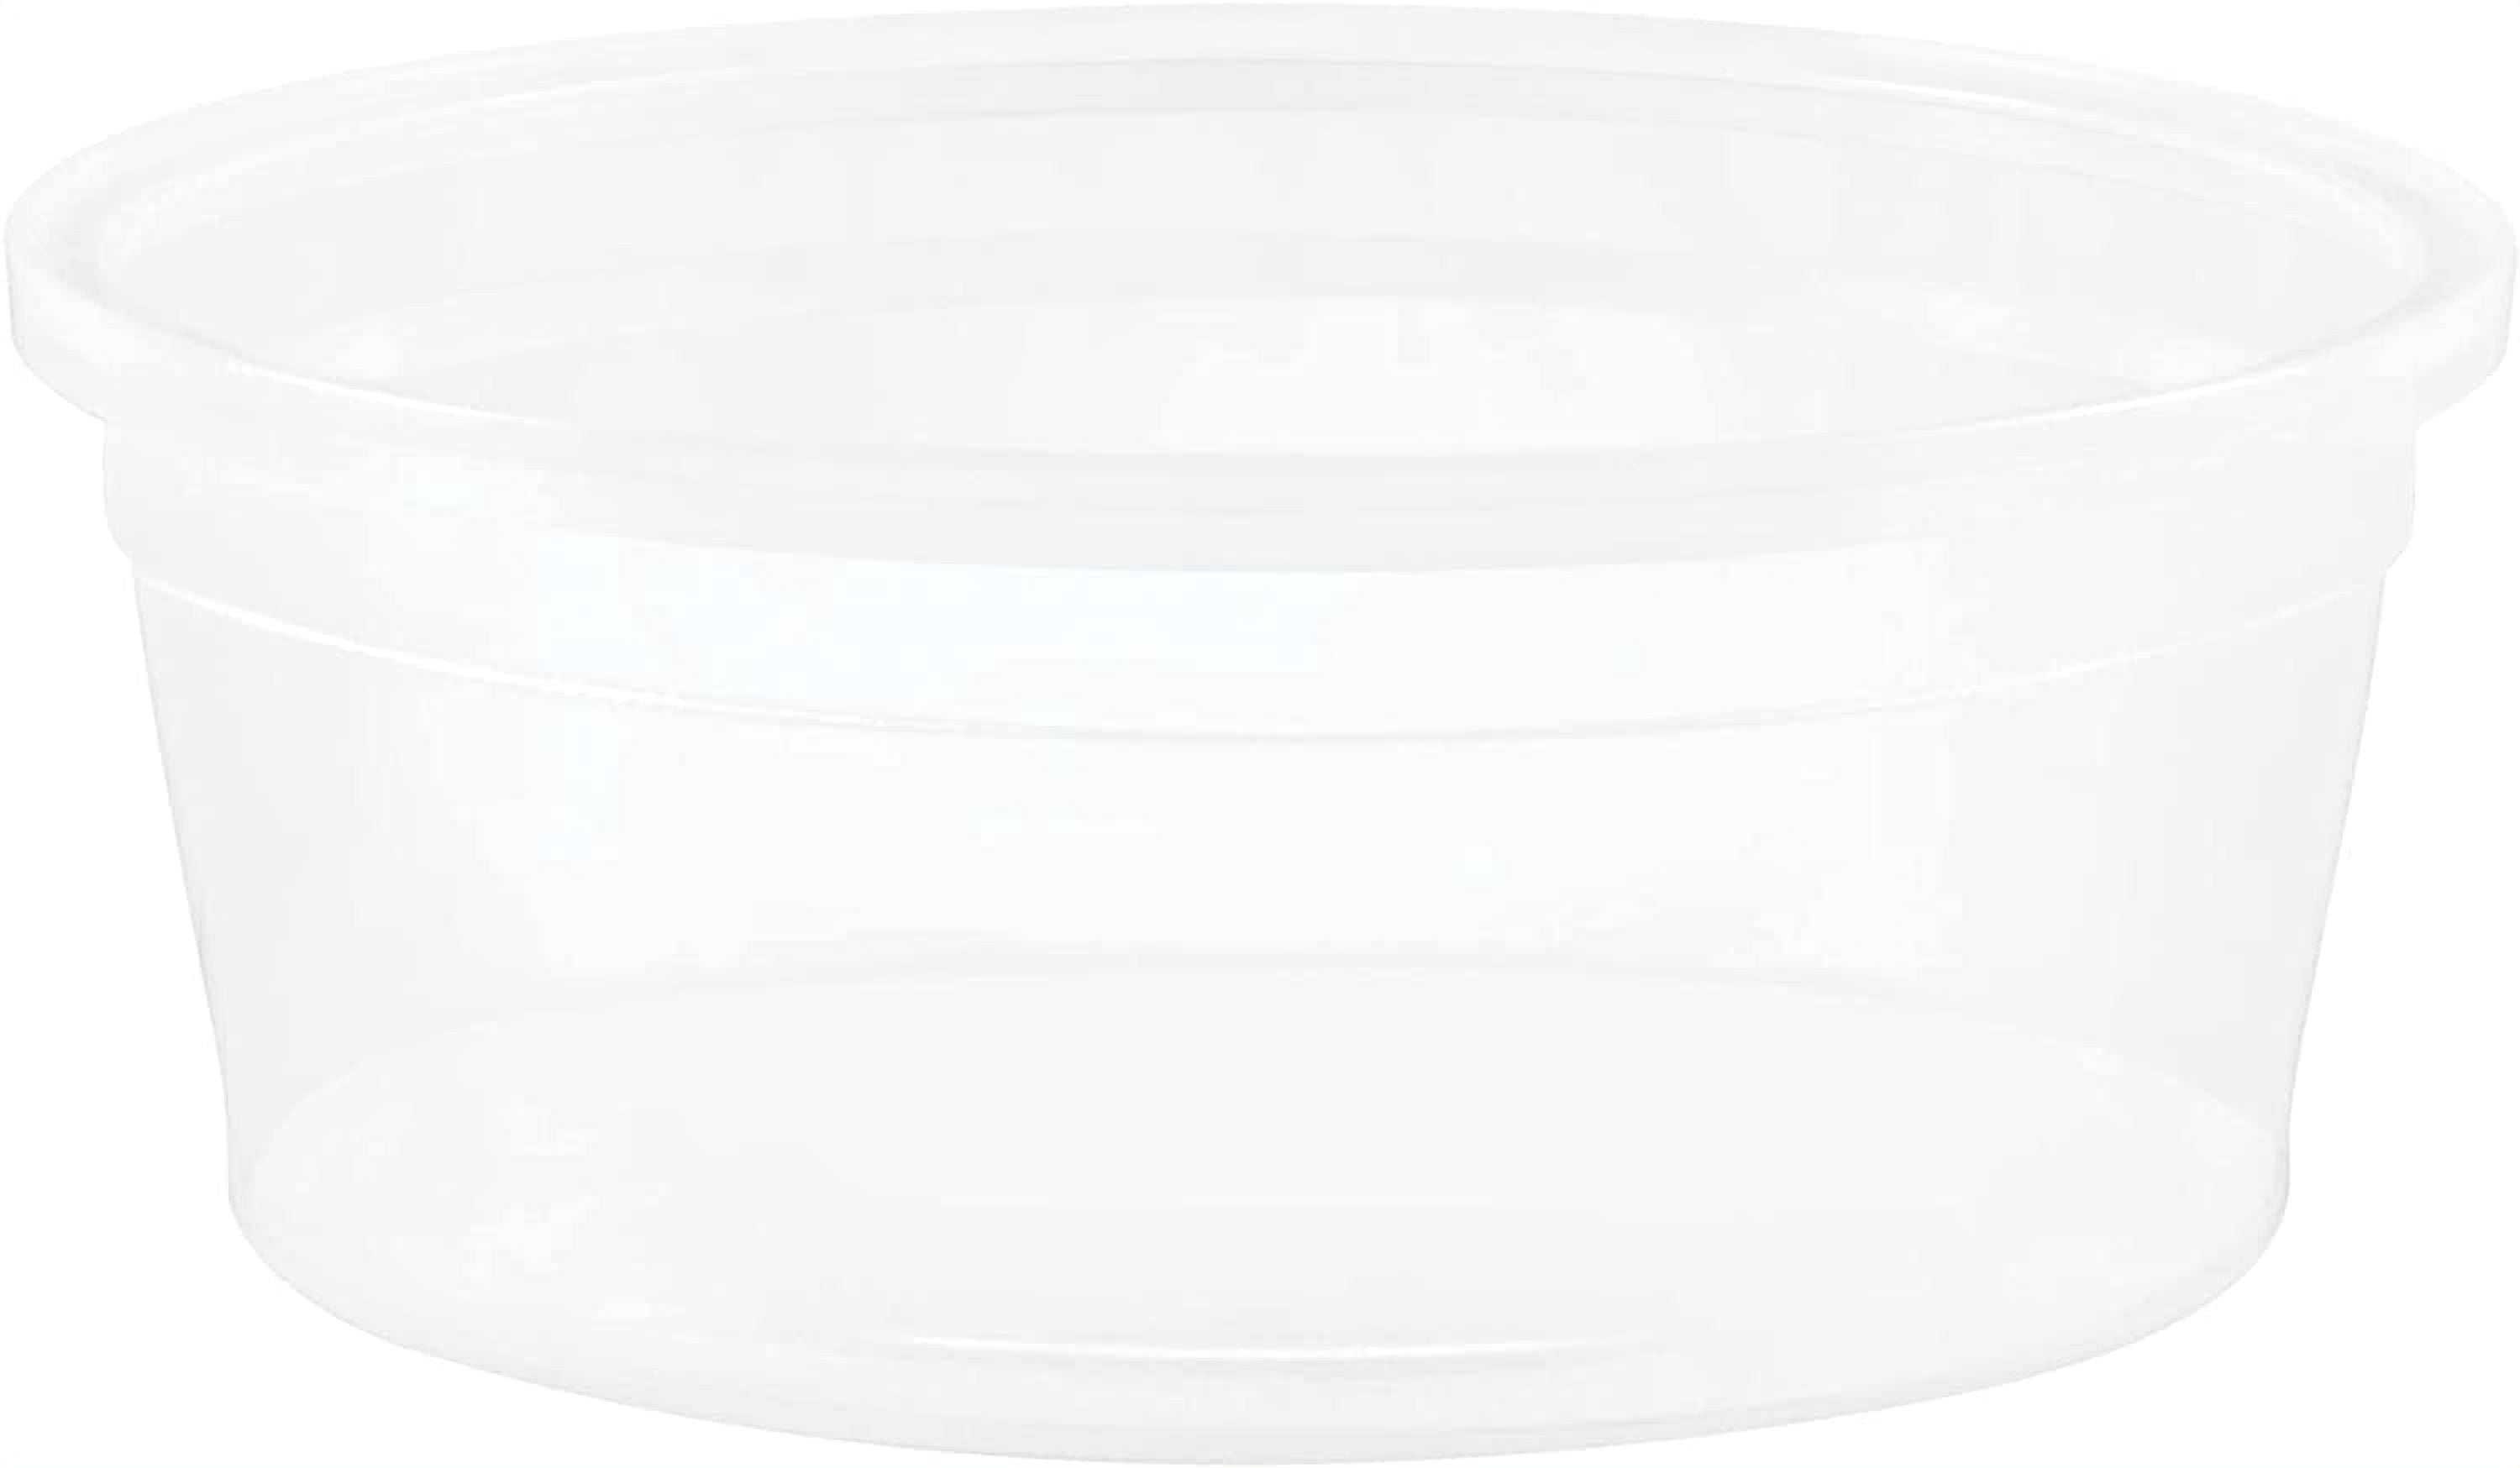 Snapware Plastic Small Round Containers - 2 Pack - Transparent, 1.2 c -  Kroger